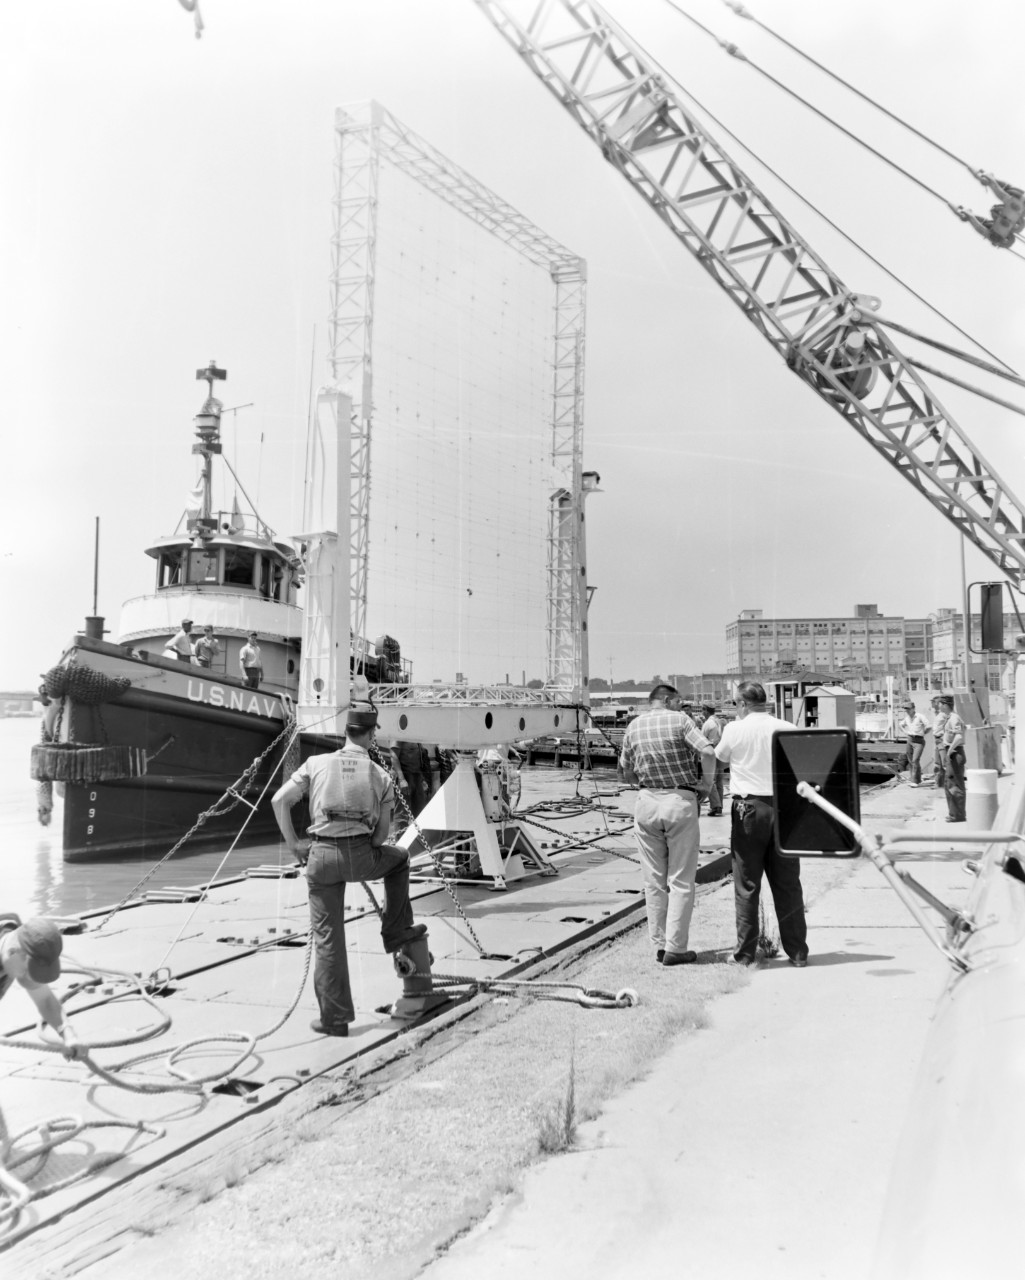 NMUSN-1012:   XAF Radar Antenna, 1960s.   Being delivered to the Washington Navy Yard for display.  Note the U.S. Navy tug alongside a small thin barge carrying the radar antenna.  The tug appears to be USS Wahtah (YTB-140).  This radar was the first shipboard radar to be installed onboard a U.S. Navy ship, USS New York (BB-34).  Surviving World War II, it was brought to the Washington Navy Yard where it was on exterior display until the mid-1980s where it was placed into storage.   Following conservation, the radar is now on display at the National Electronics Museum, Linthicum, Maryland.    Original is a black and white negative.   National Museum of the U.S. Navy Photograph Collection.